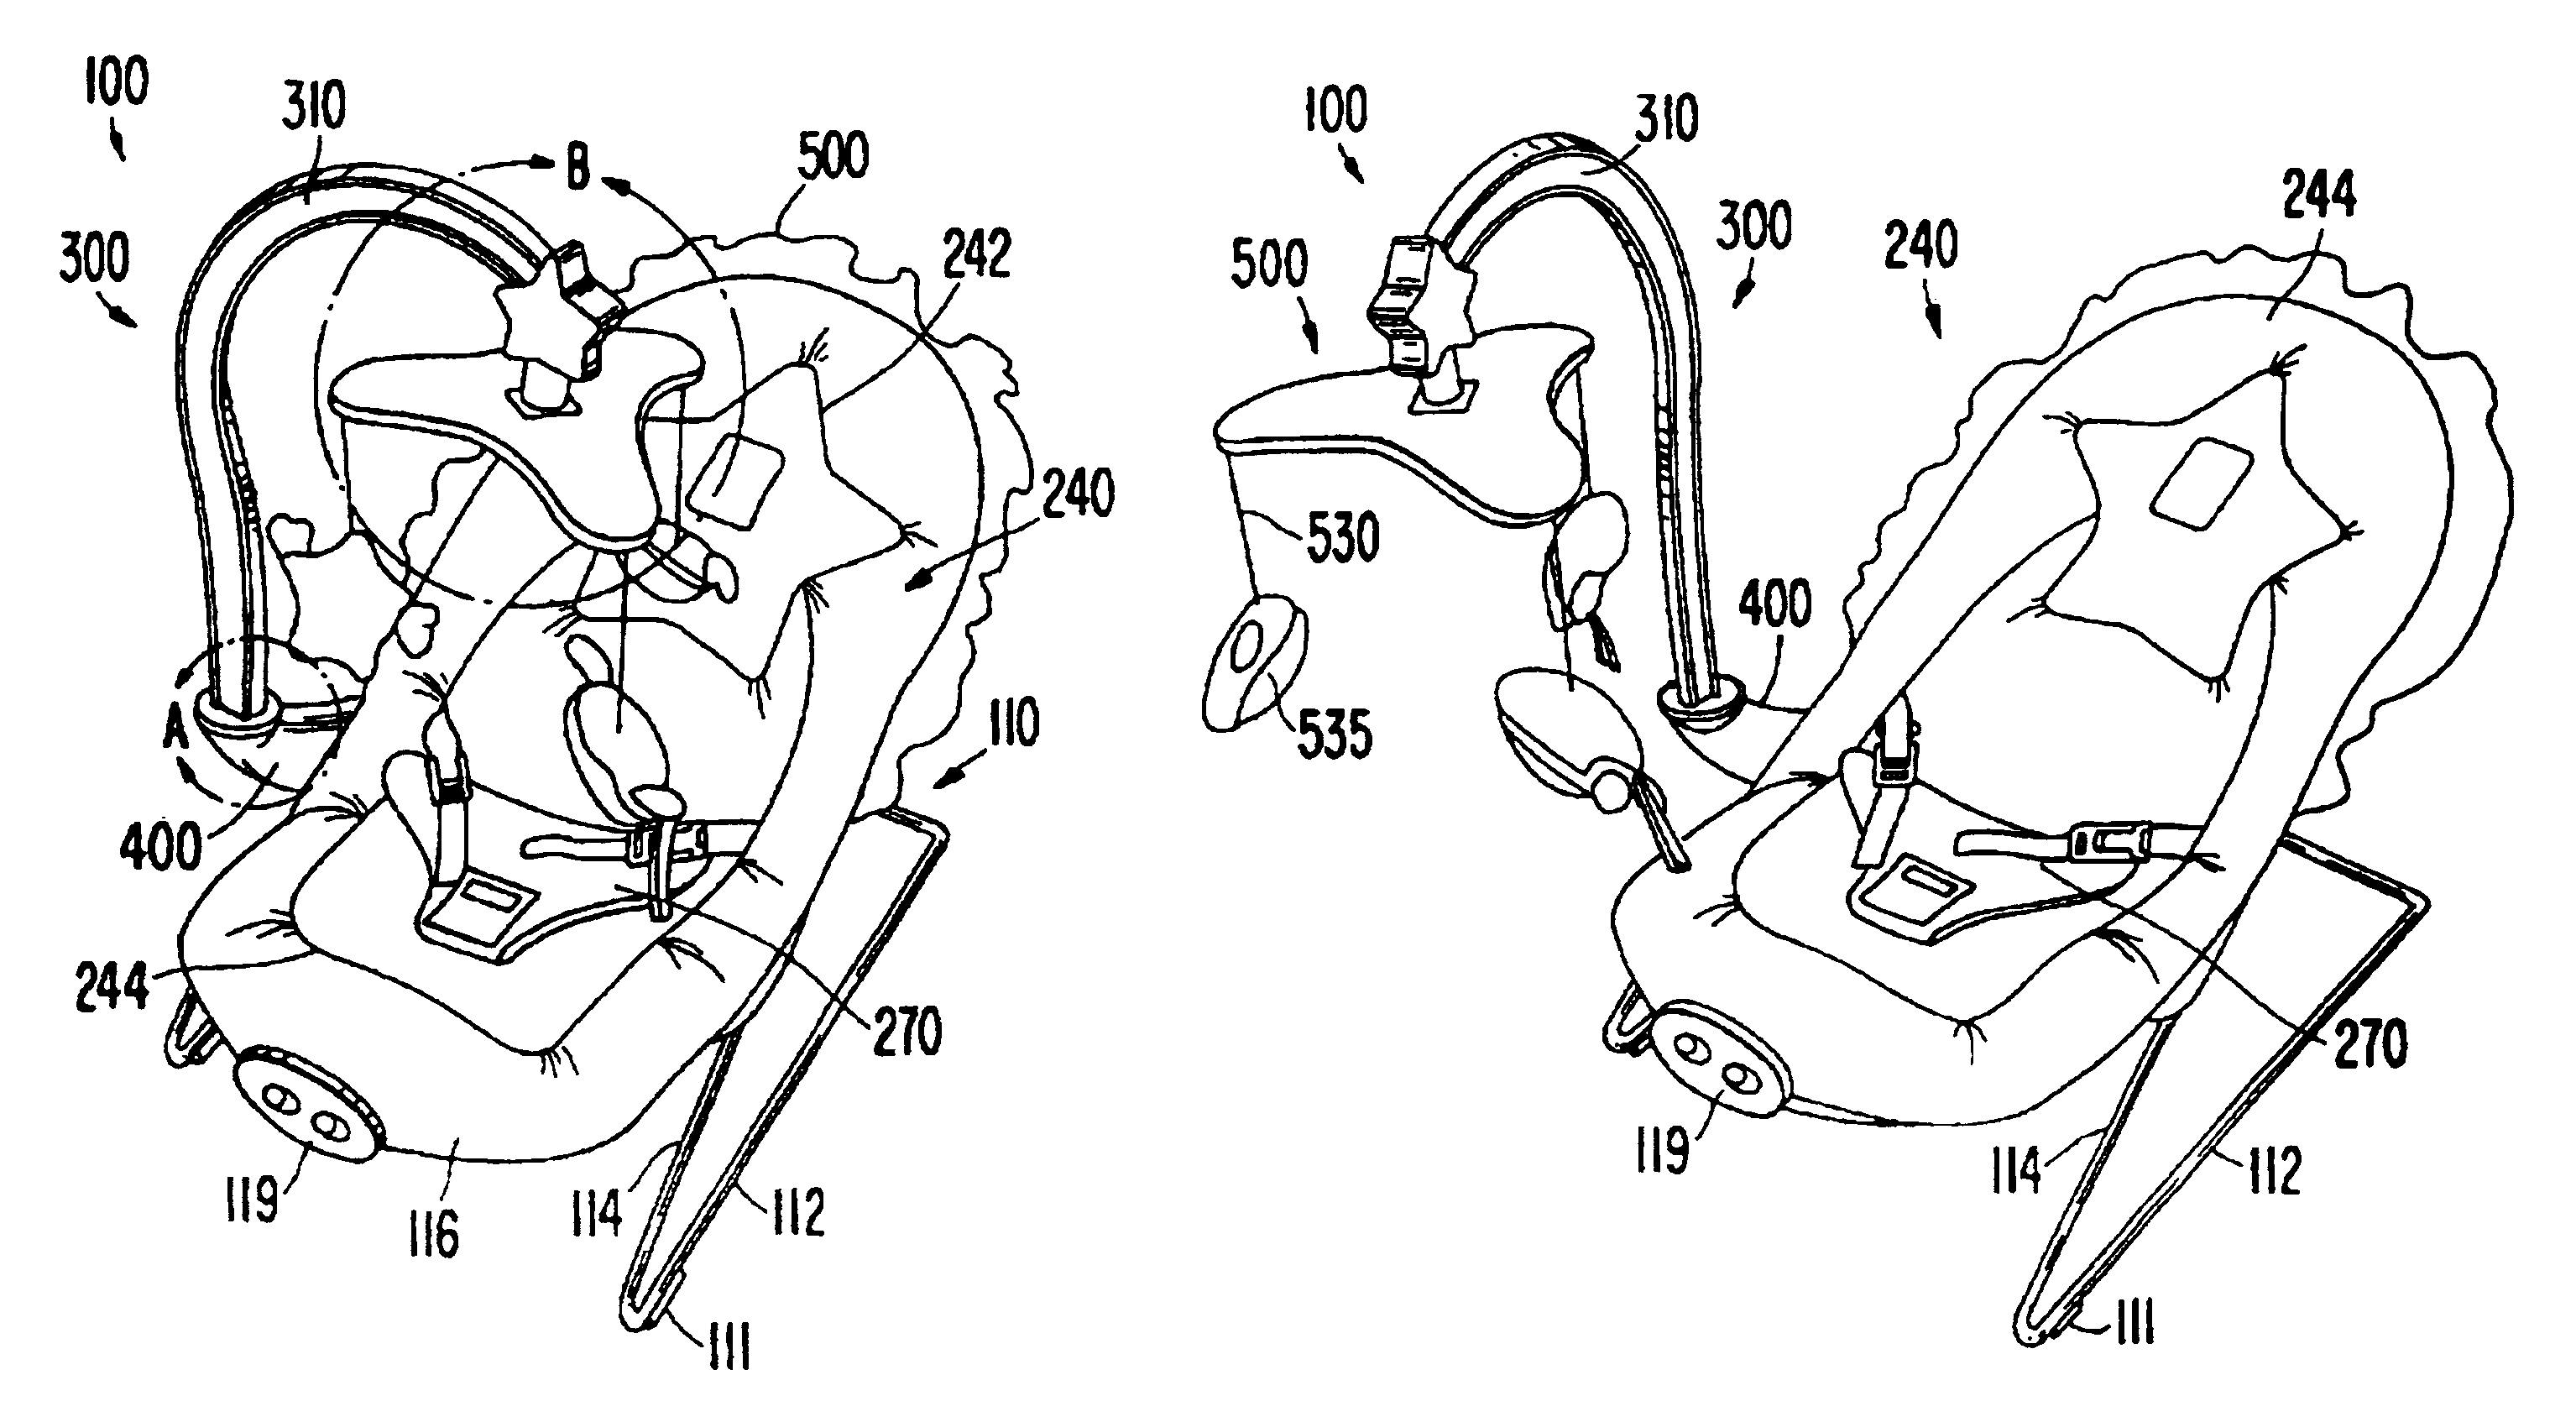 Infant support with entertainment device